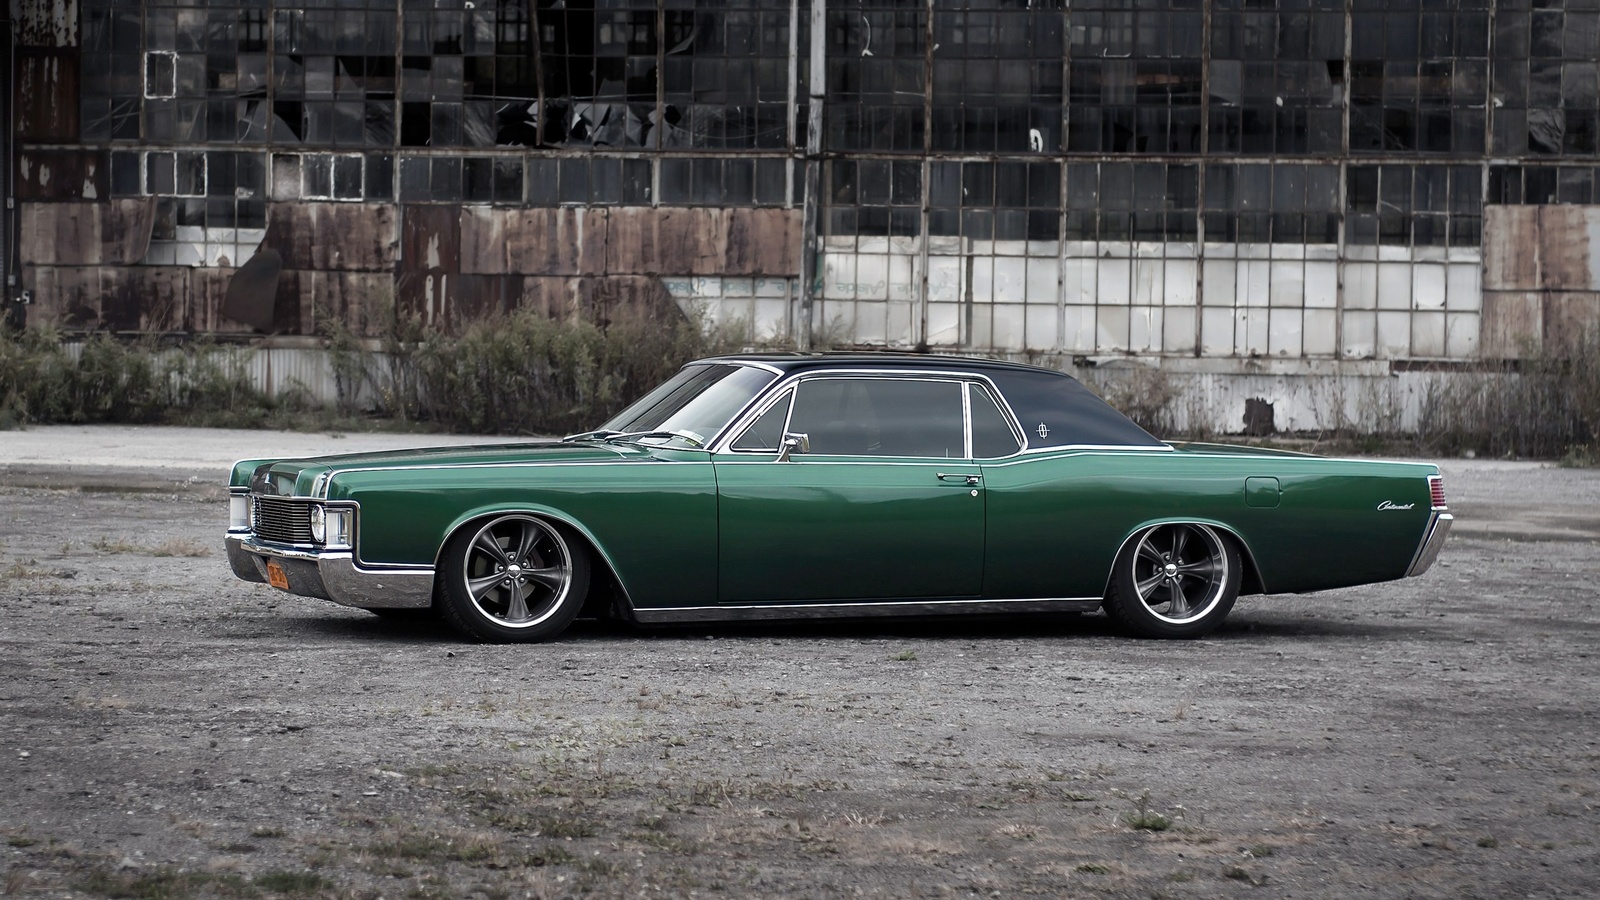 lincoln continental, tuning, stance, american cars, retro cars, green